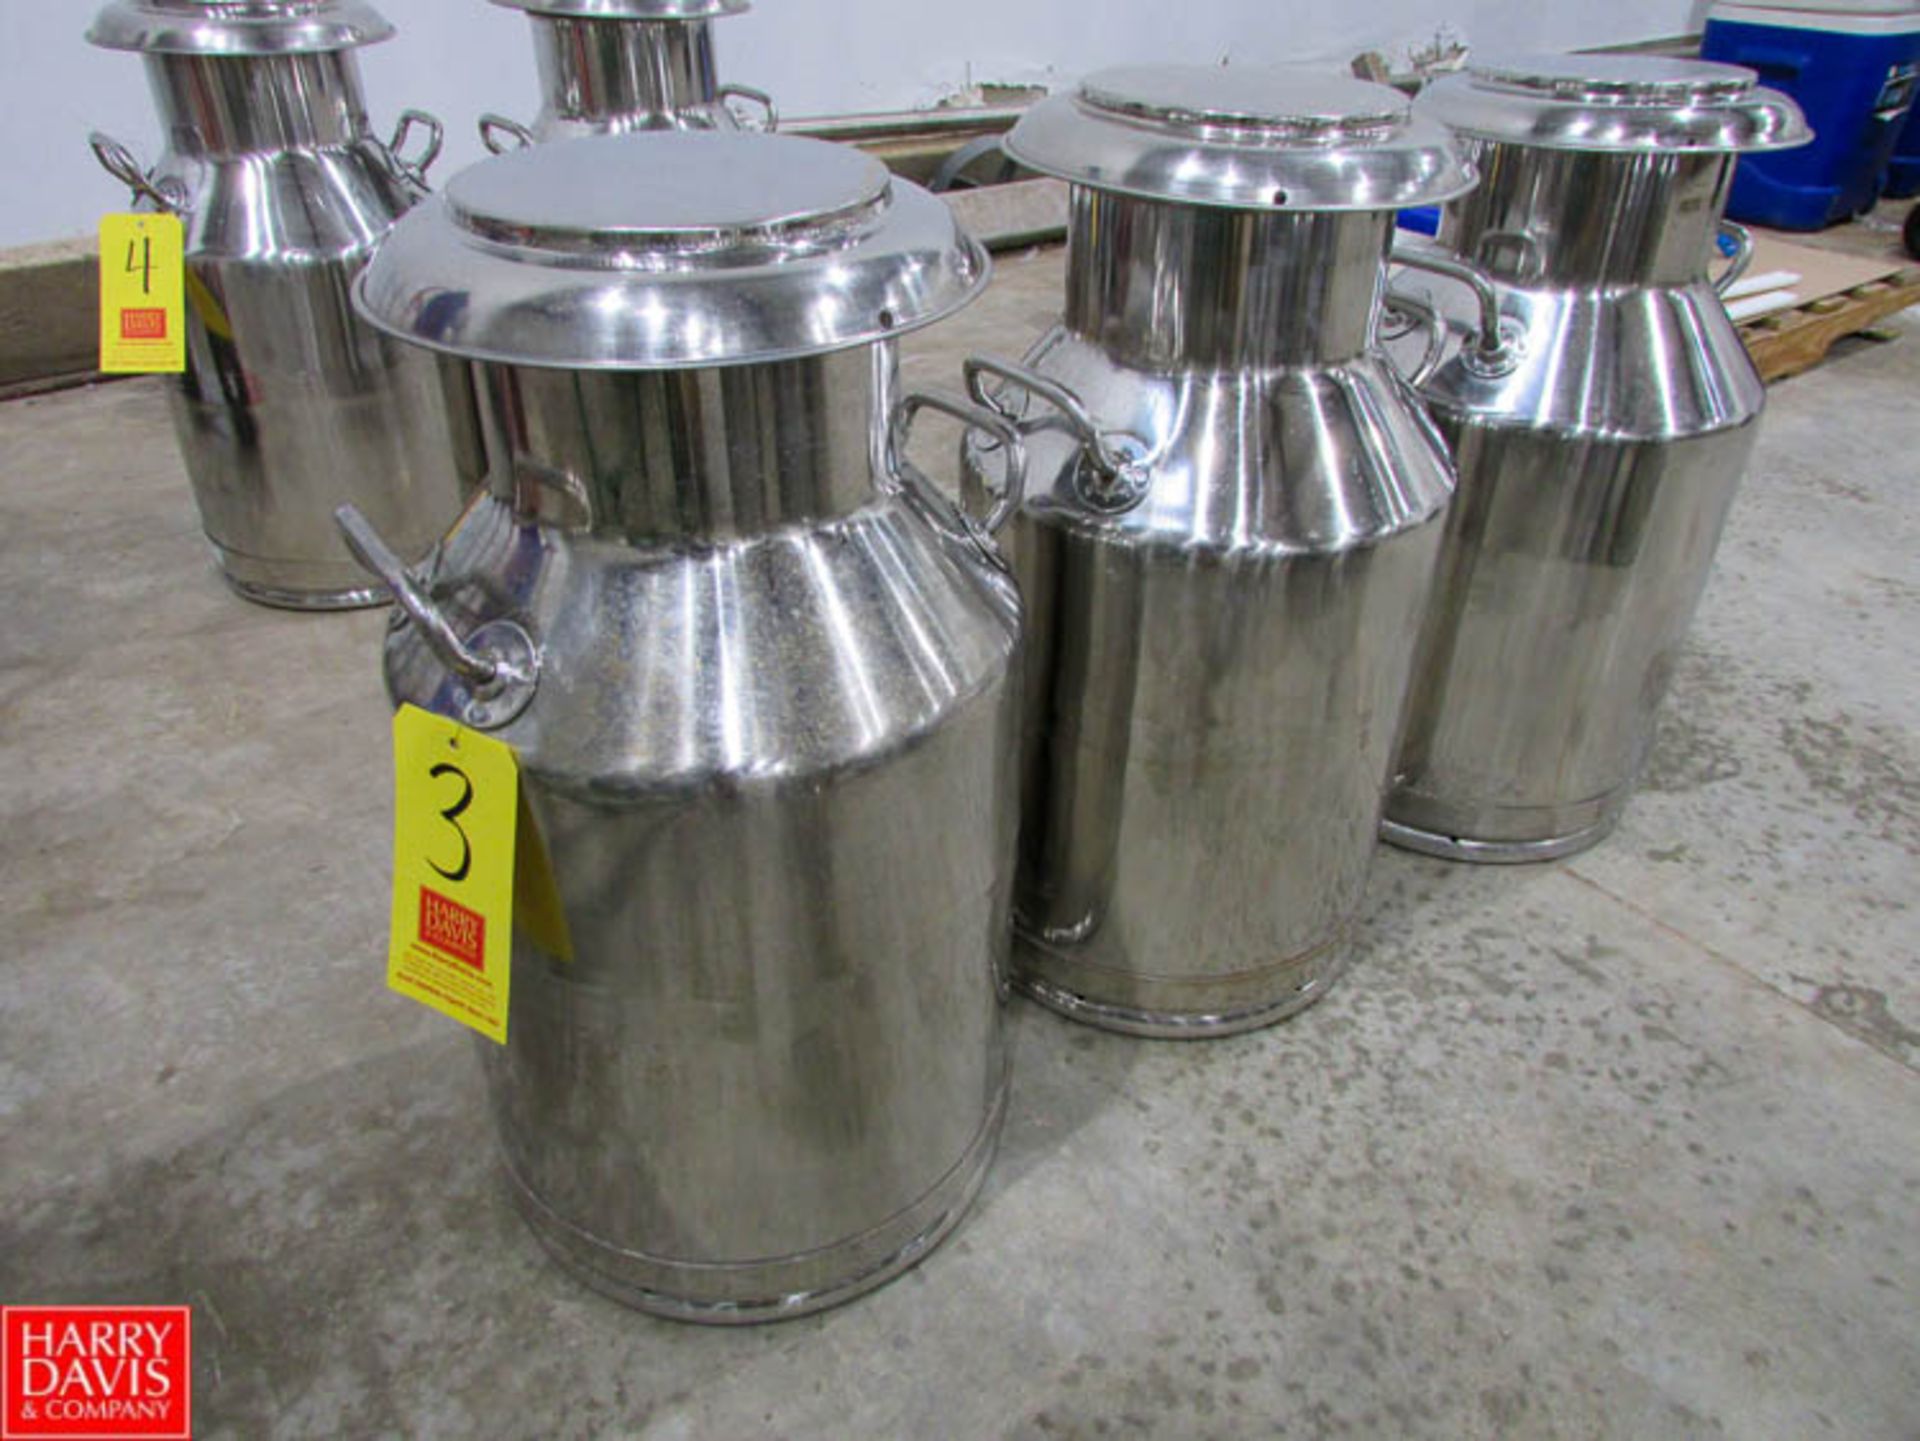 10 Gallon S/S Milk Cans with Lids Rigging Fee: $ 30